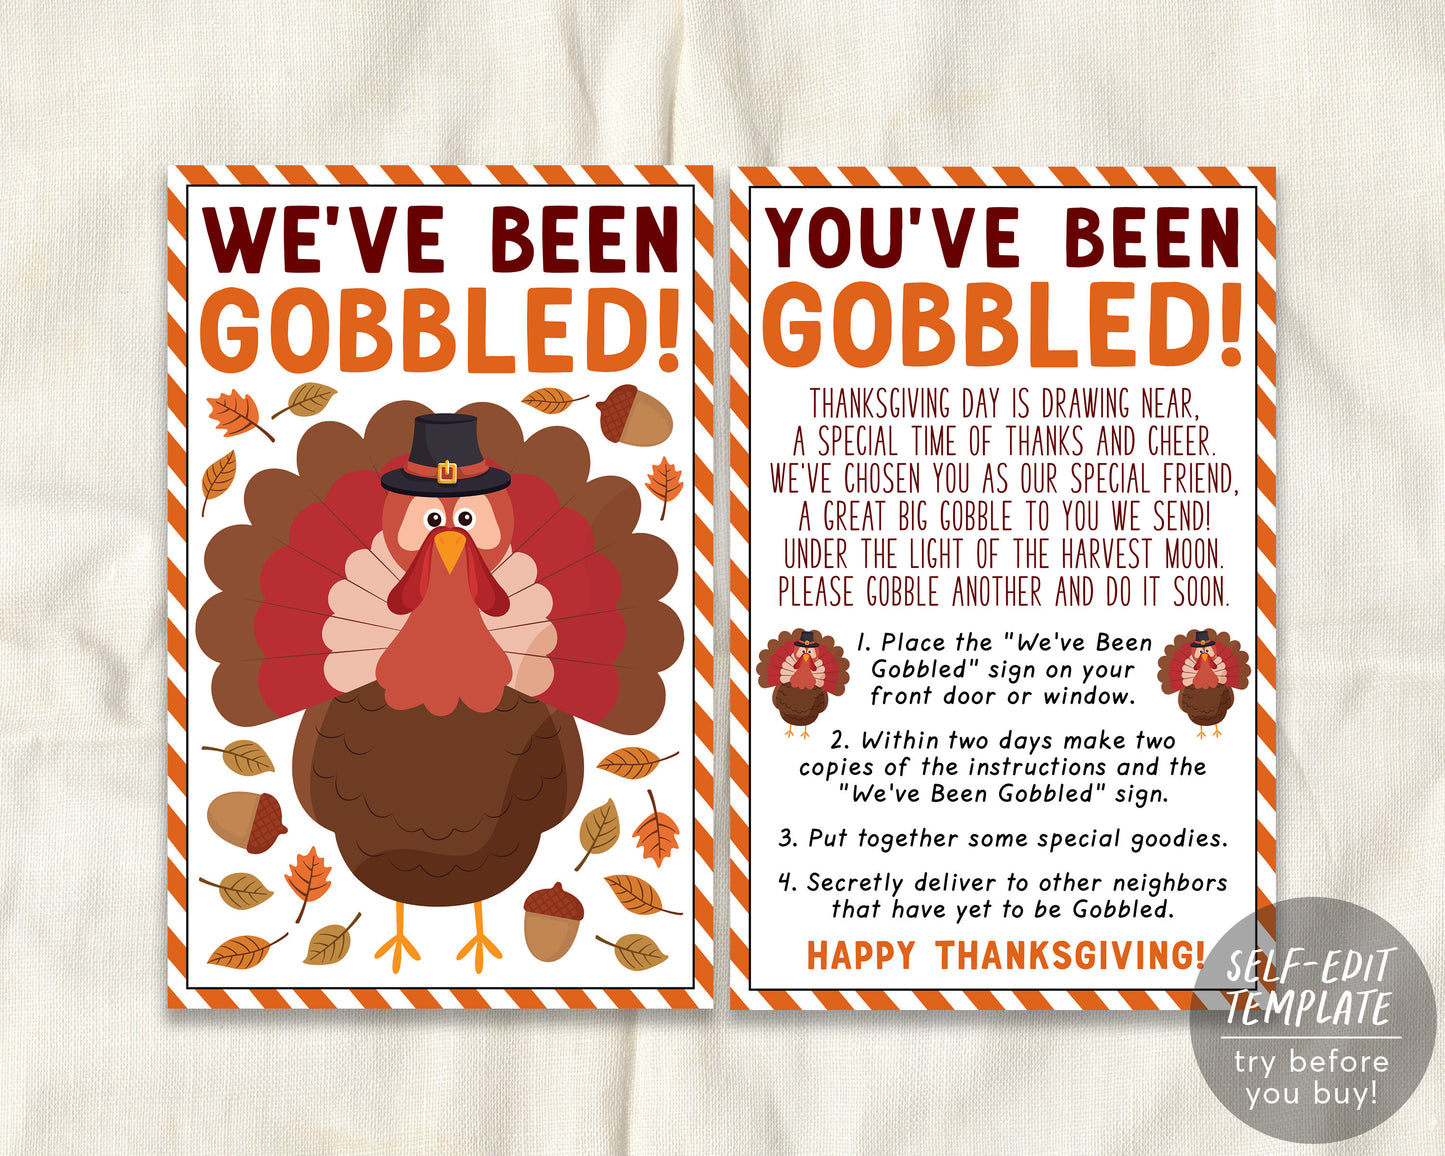 We've Been Gobbled Game Editable Template, You've Been Gobbled, Thanksgiving Friendsgiving Activity Tradition Sign Instructions Neighbors